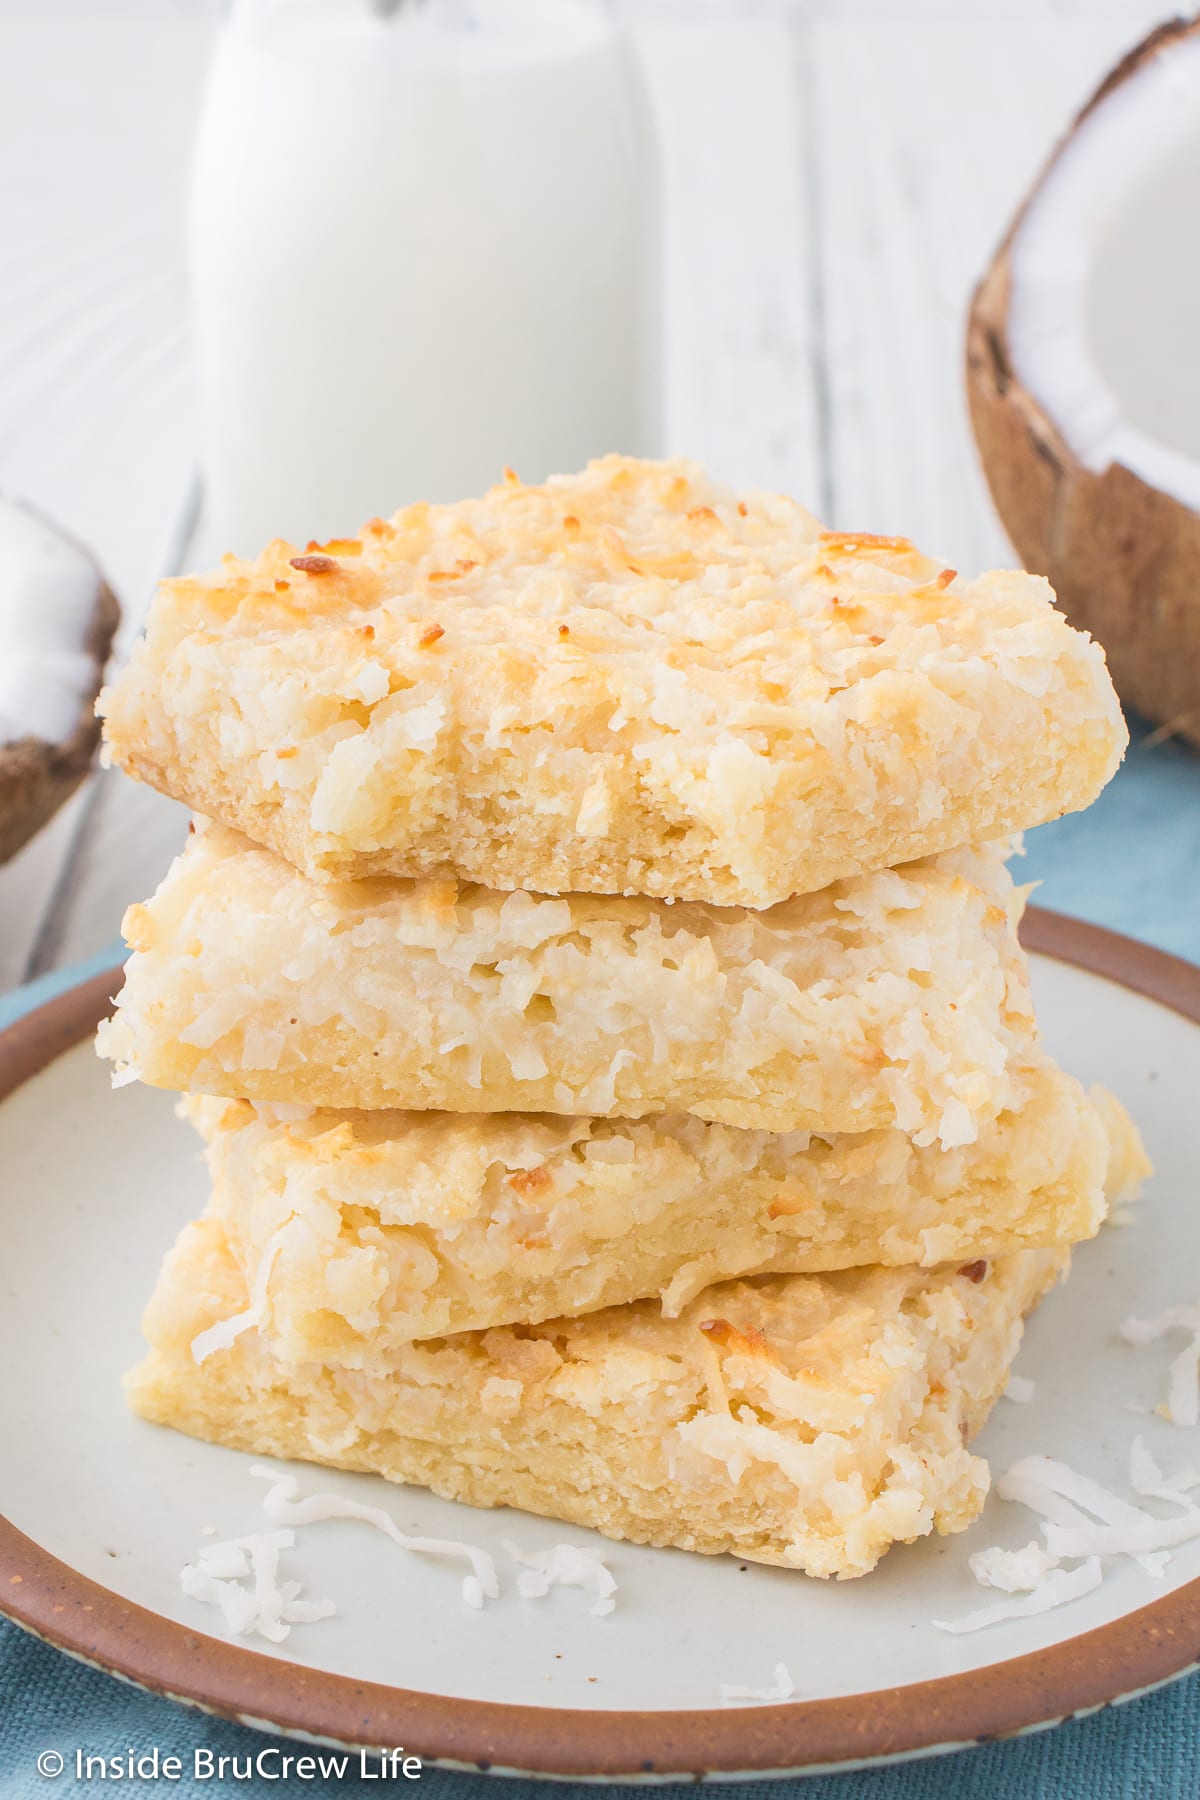 A stack of four gooey bars made with coconut on a plate.